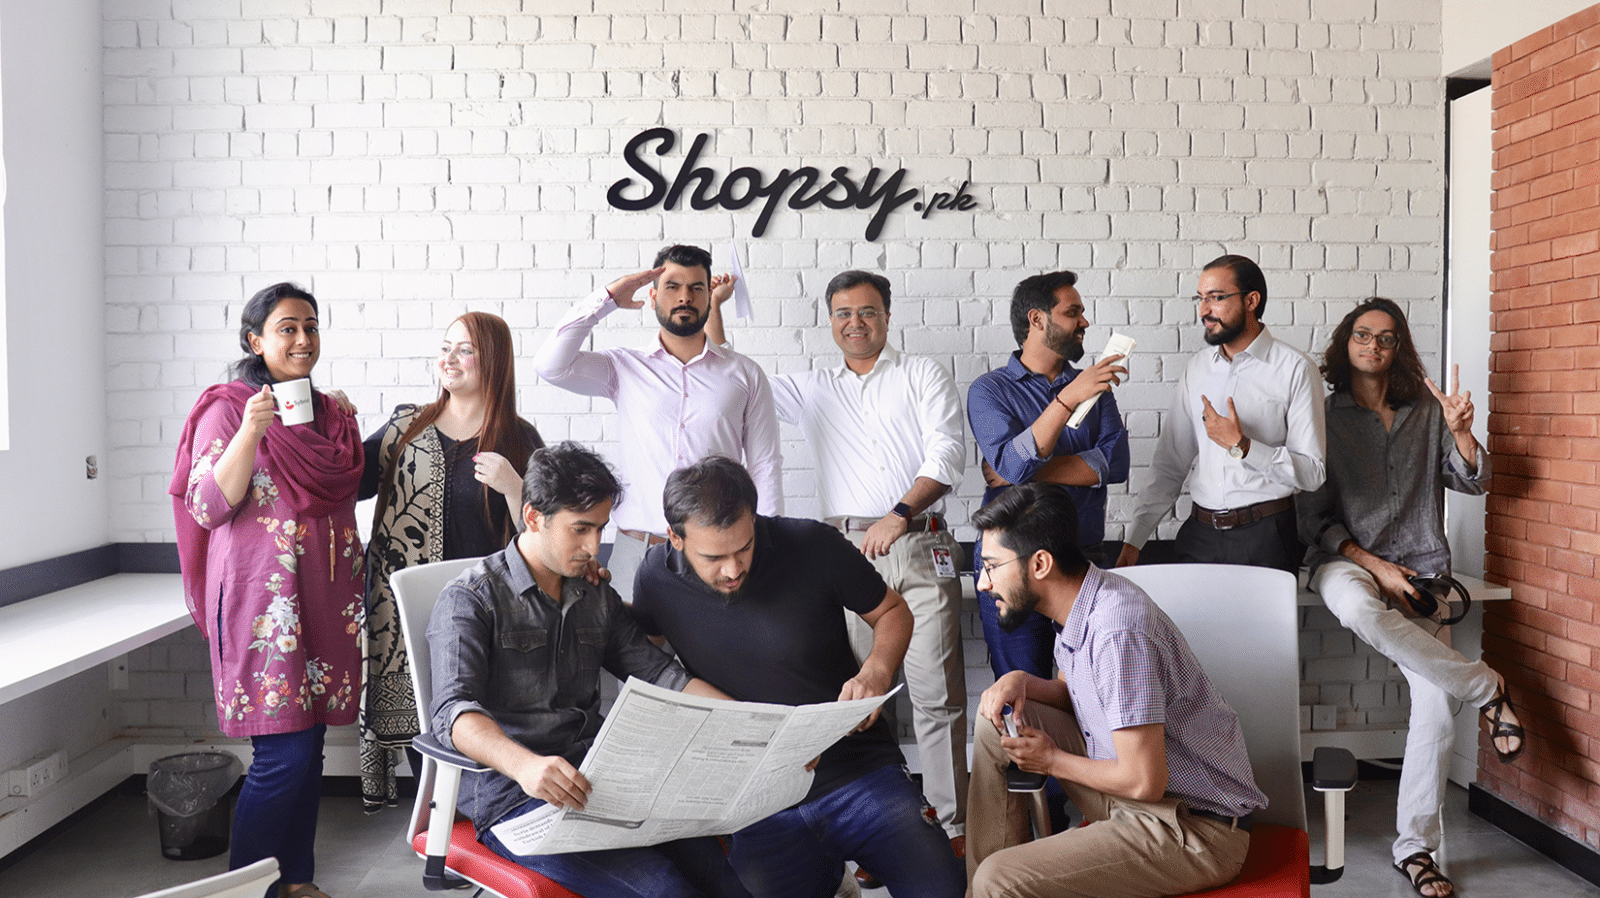 Search Engine Shopsy.pk Scales to 2.5 Million Products & 150 Online Stores